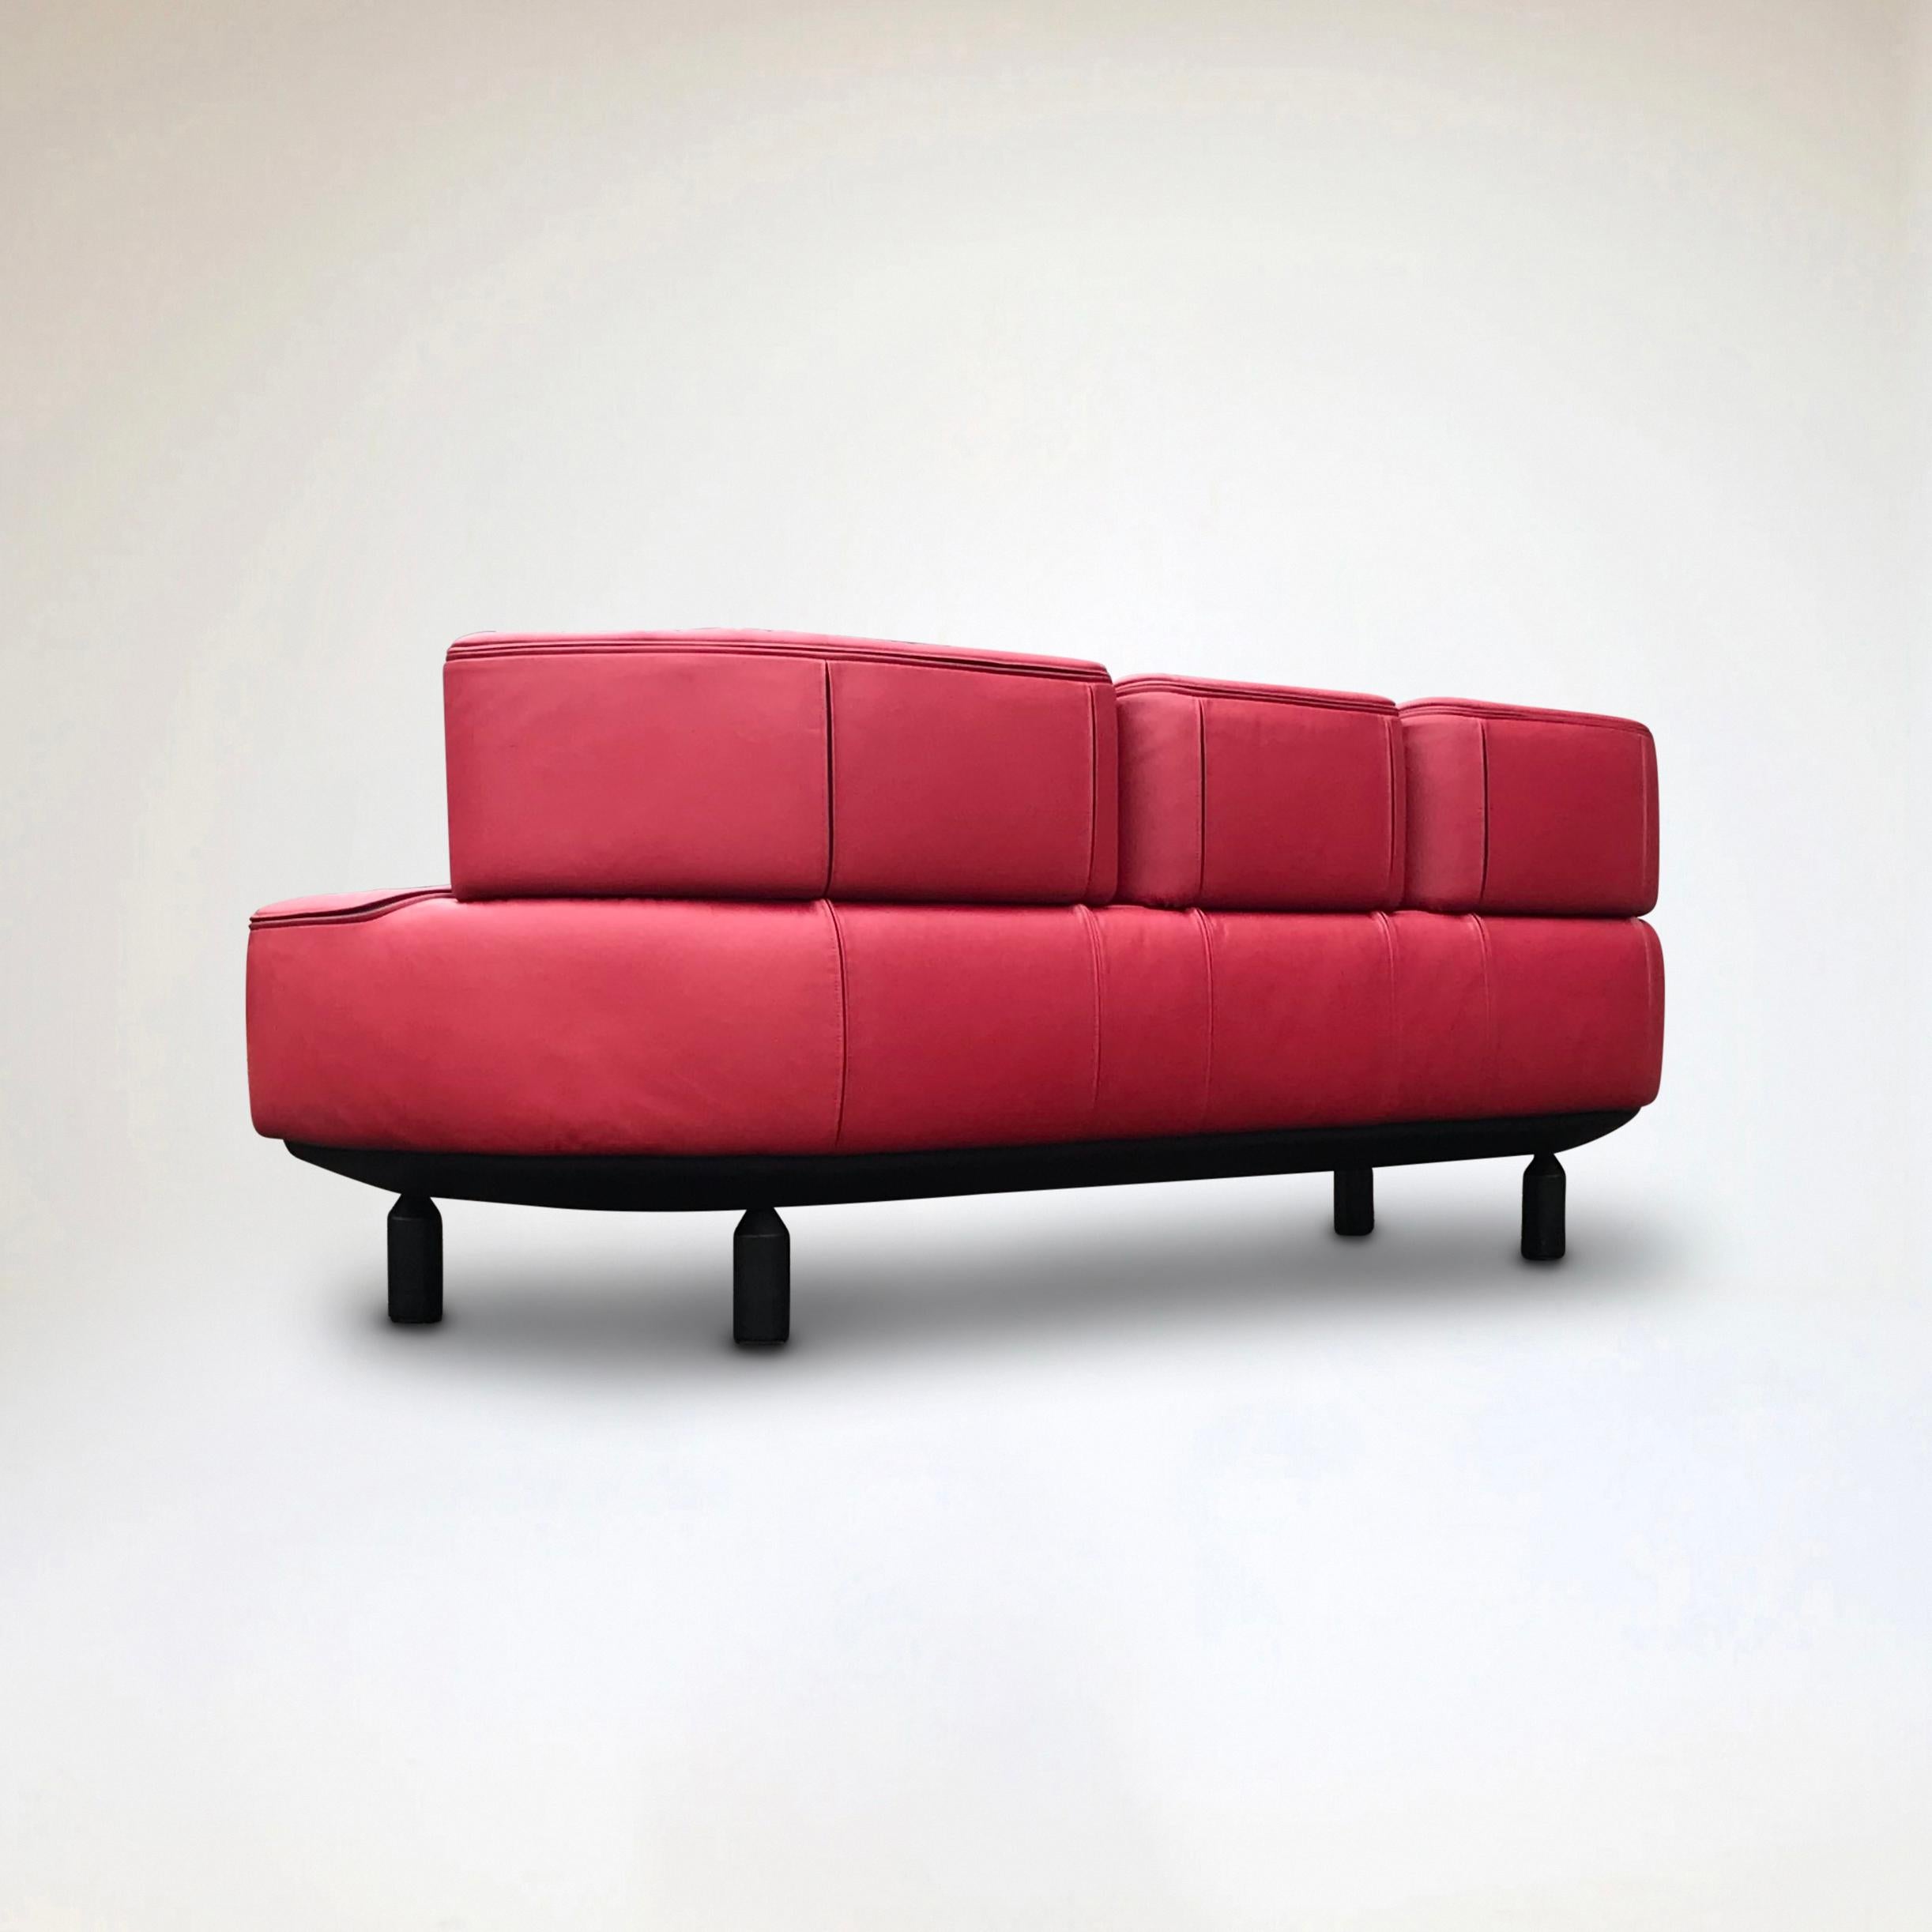 Bull 3-seater red leather sofa by Gianfranco Frattini for Cassina 1987 For Sale 2